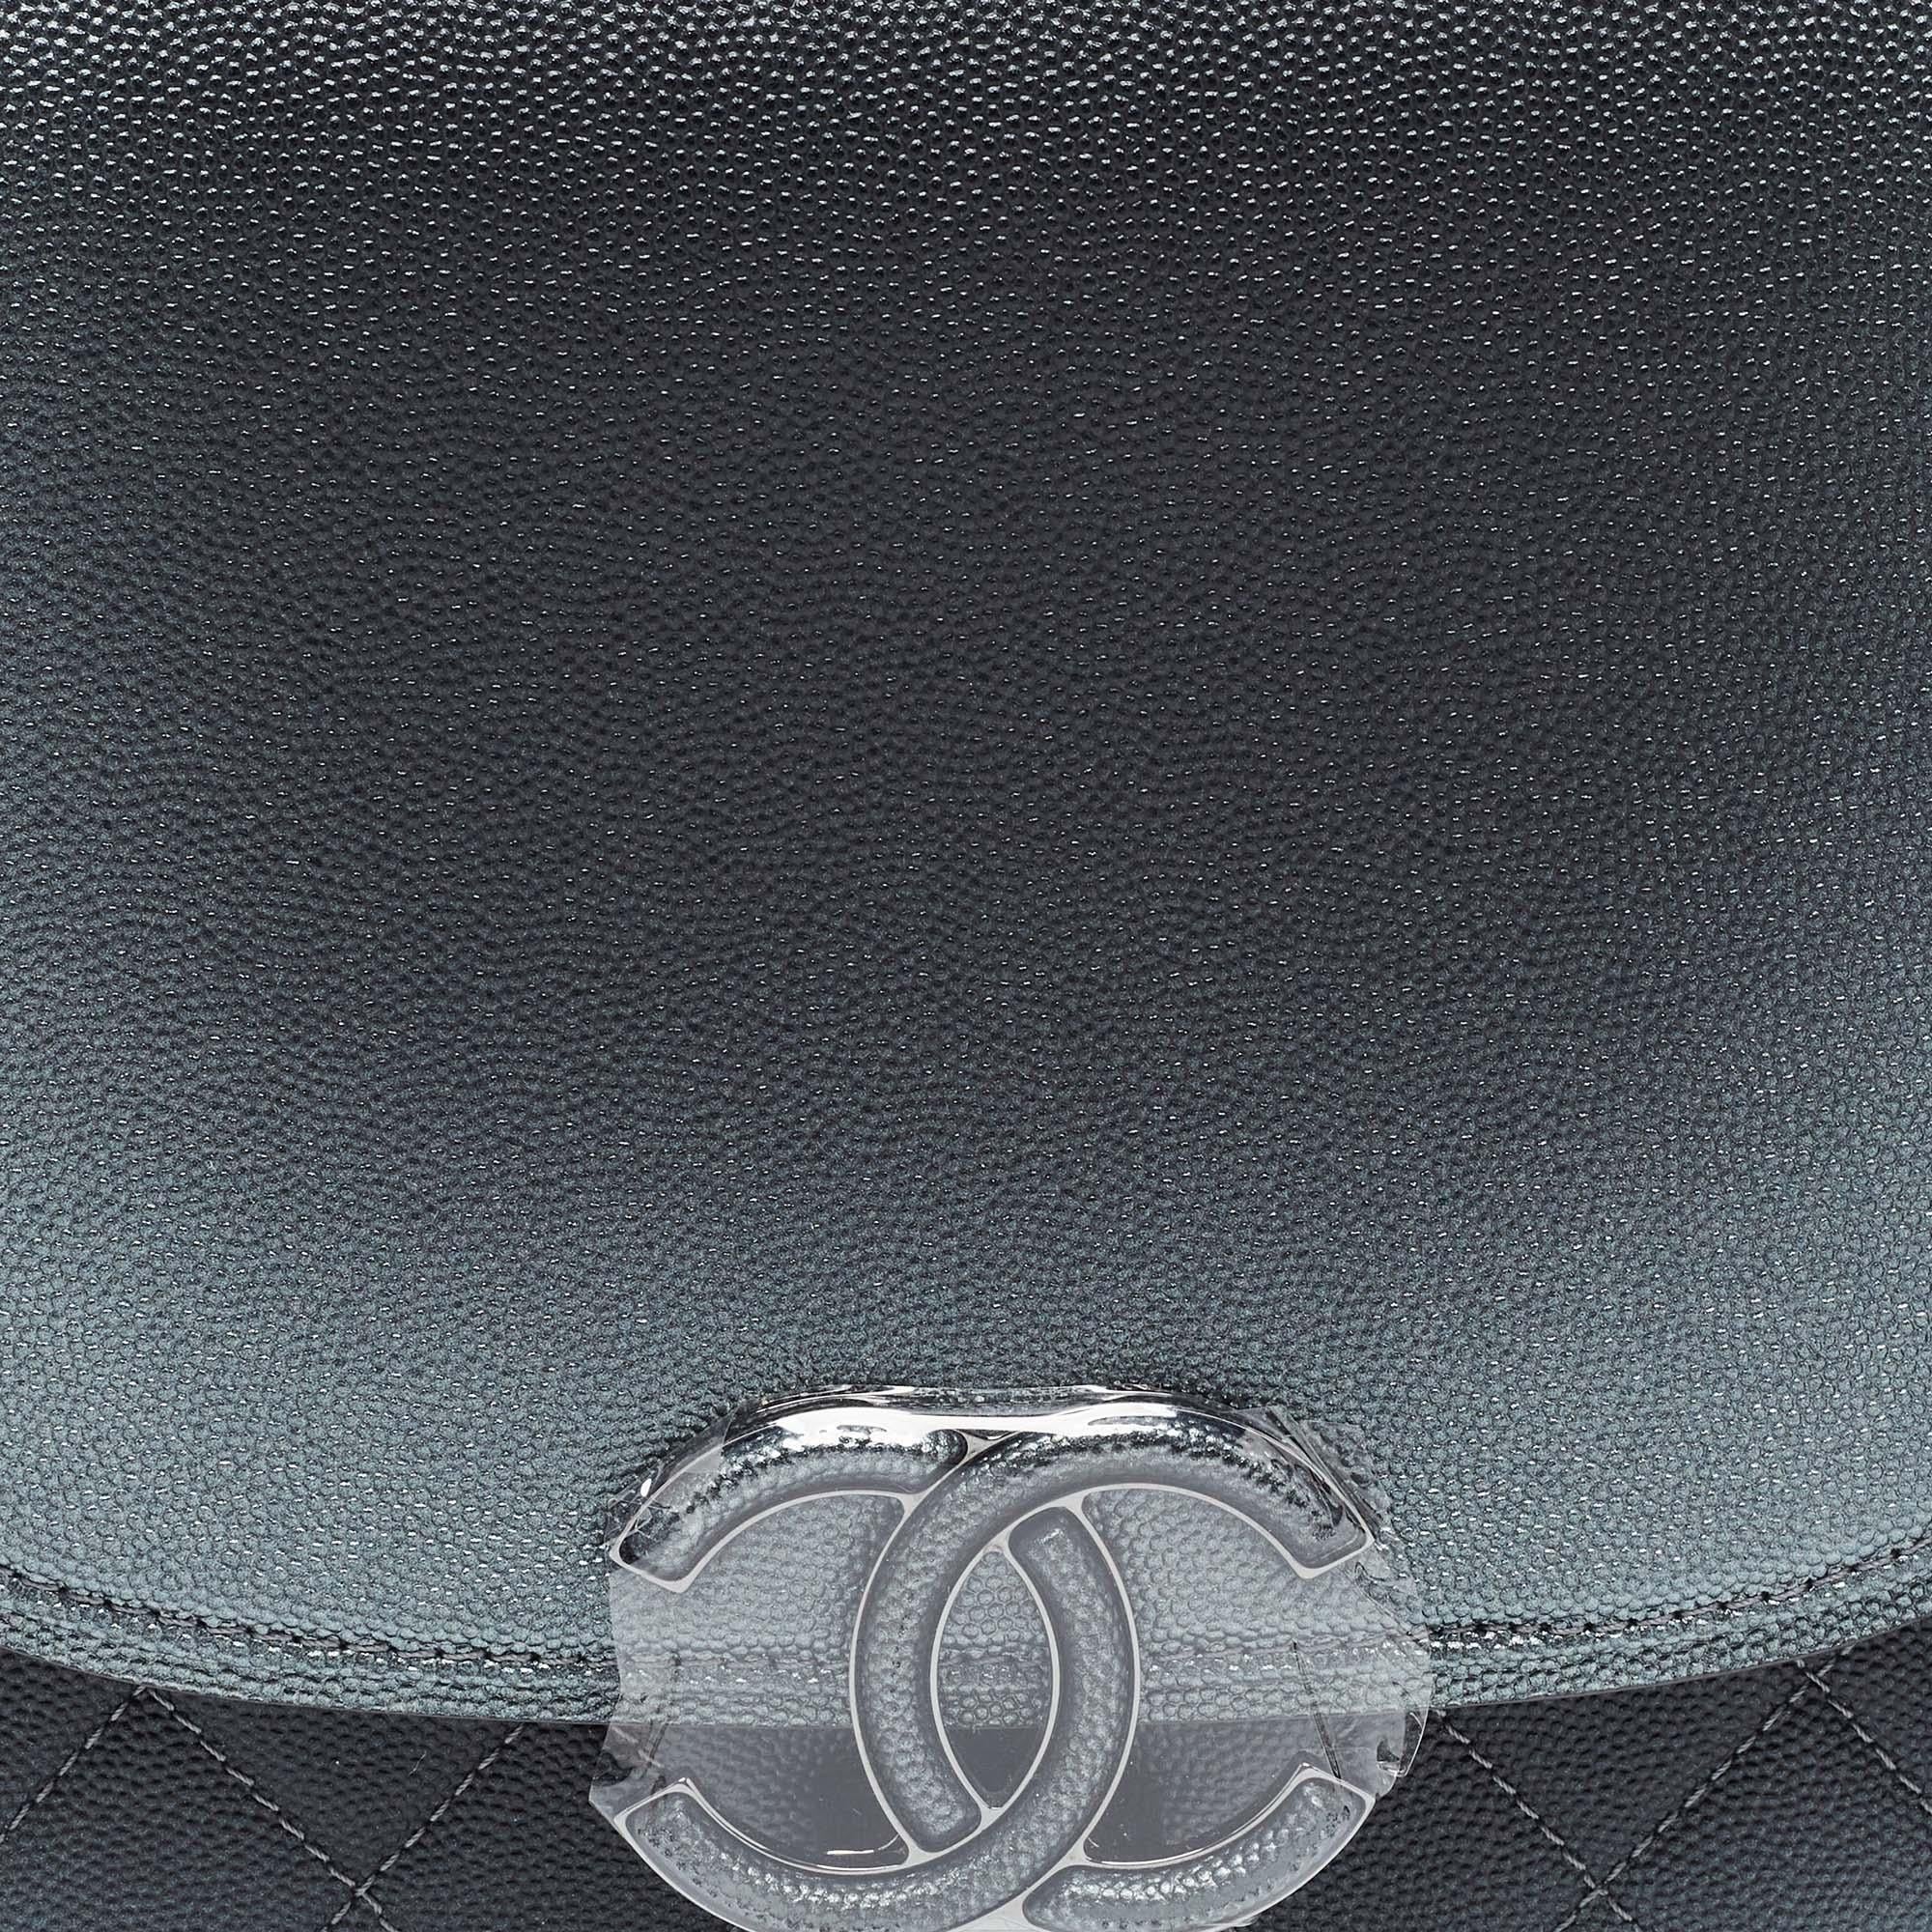 Chanel Metallic Grey Ombre Quilted Caviar Leather Coco Curve Flap Bag 3